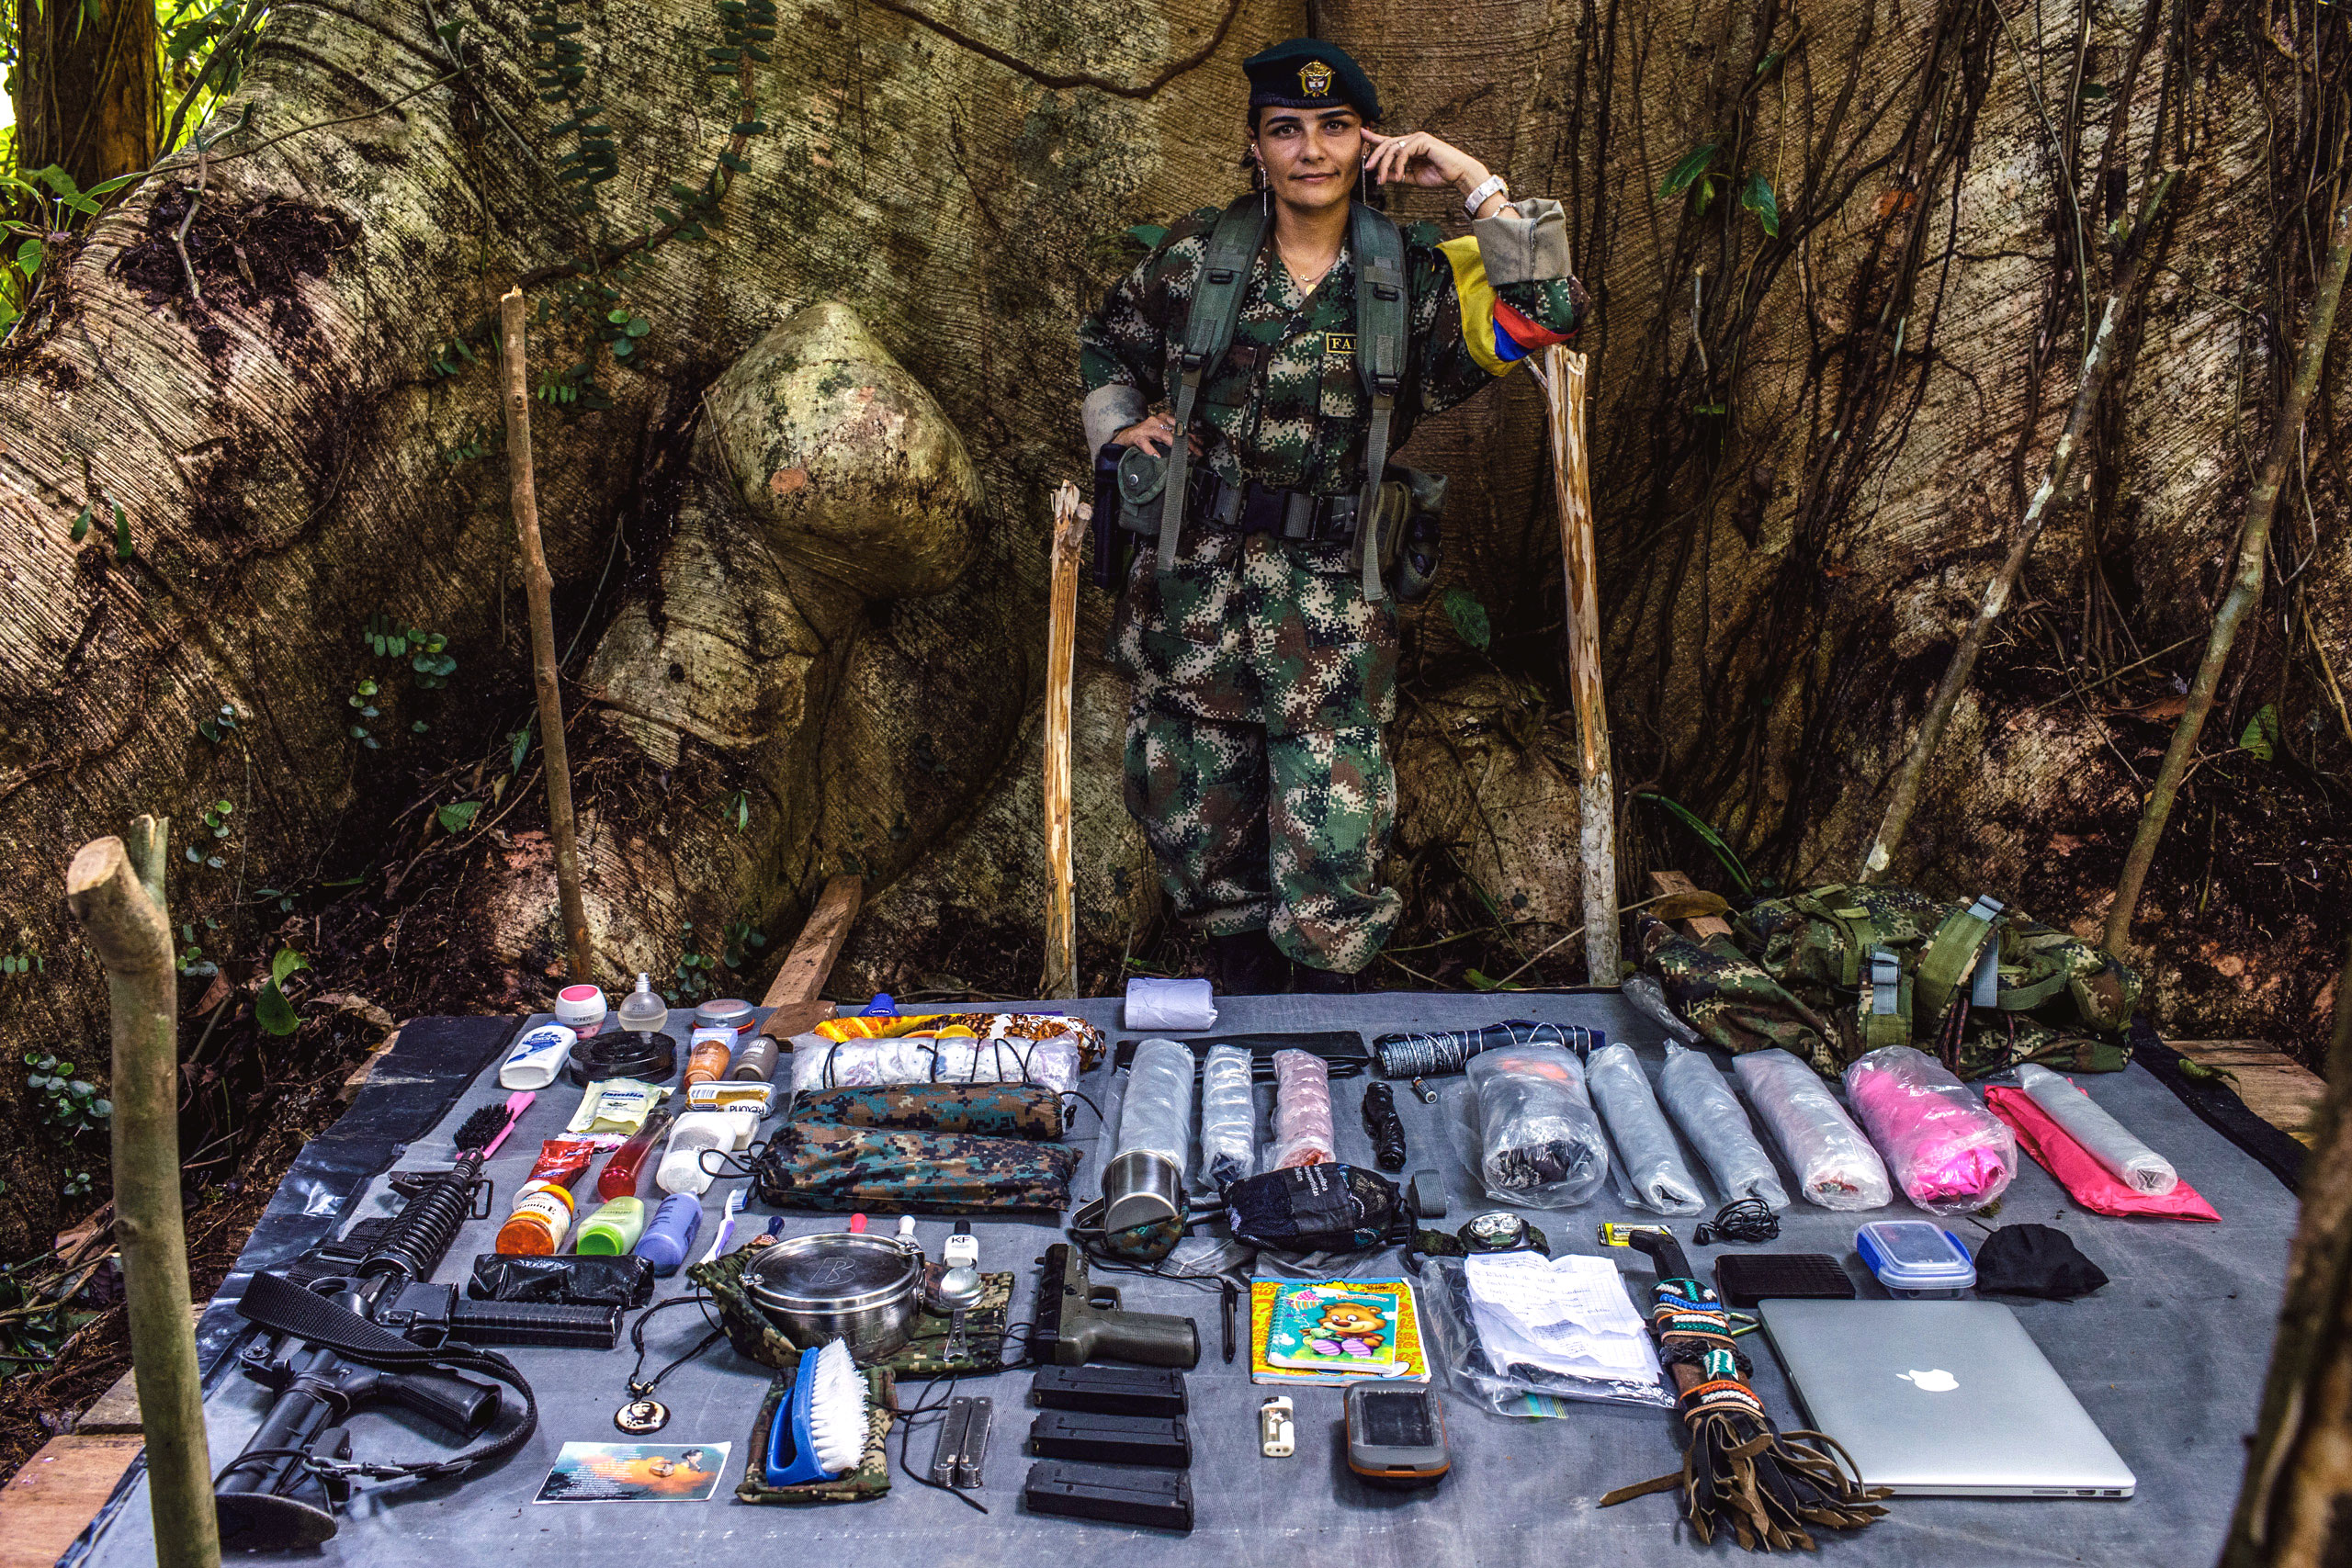 Brenda,  is a  31-year-old commander who has been a member of FARC for 15 years. Besides a rifle,  pistol. and laptop for  intelligence missions, in her backpack she also carries nail polish and perfume. Her boyfriend is also a member of  FARC.